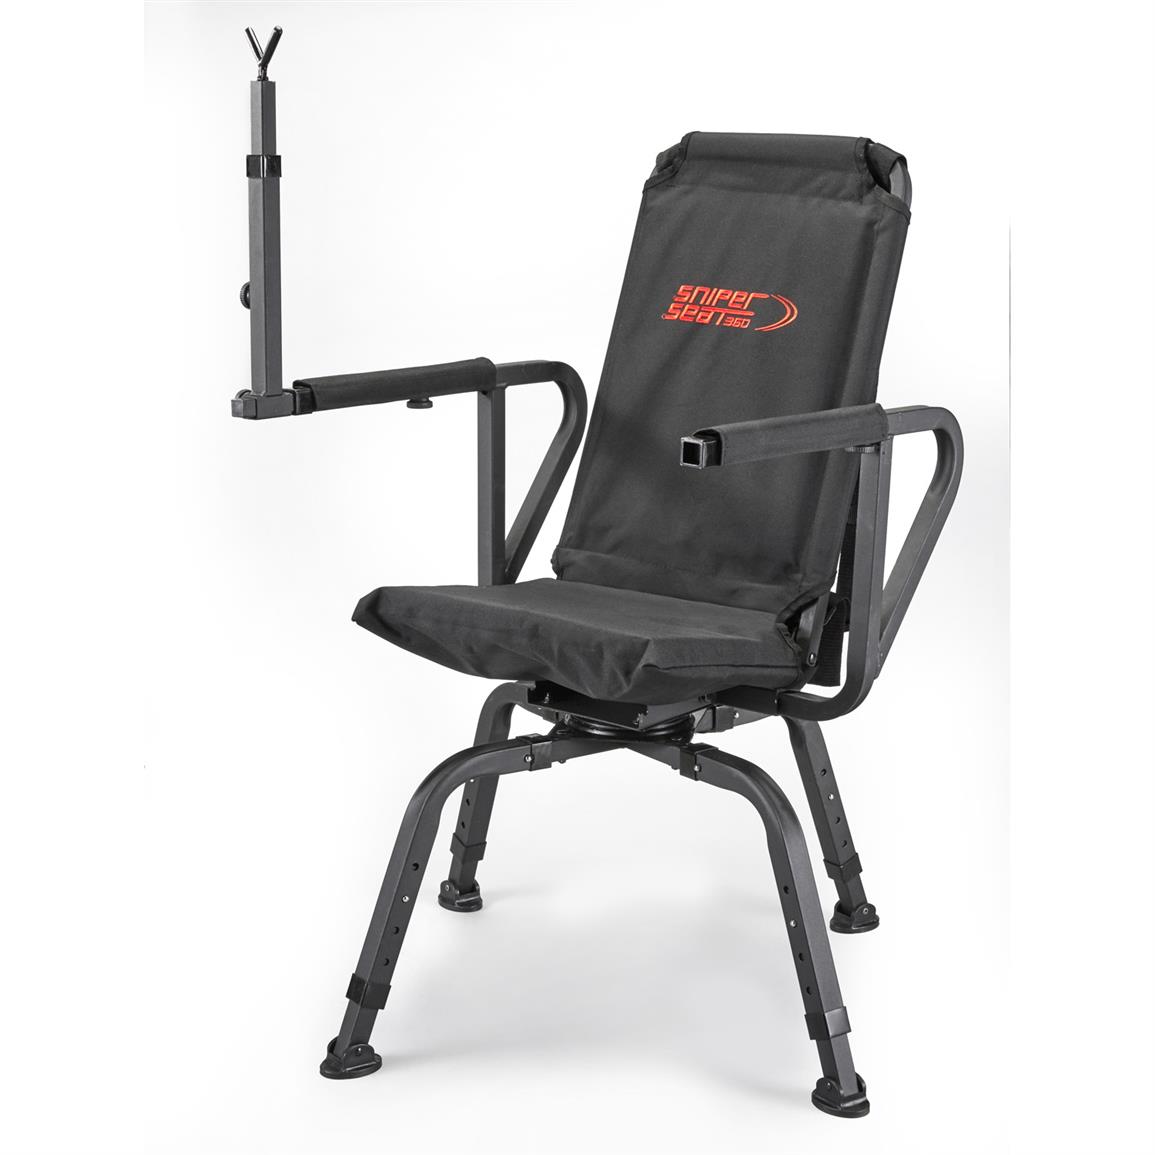 Sniper Seat 360 Shooting Chair - 625980, Stools, Chairs & Seat Cushions